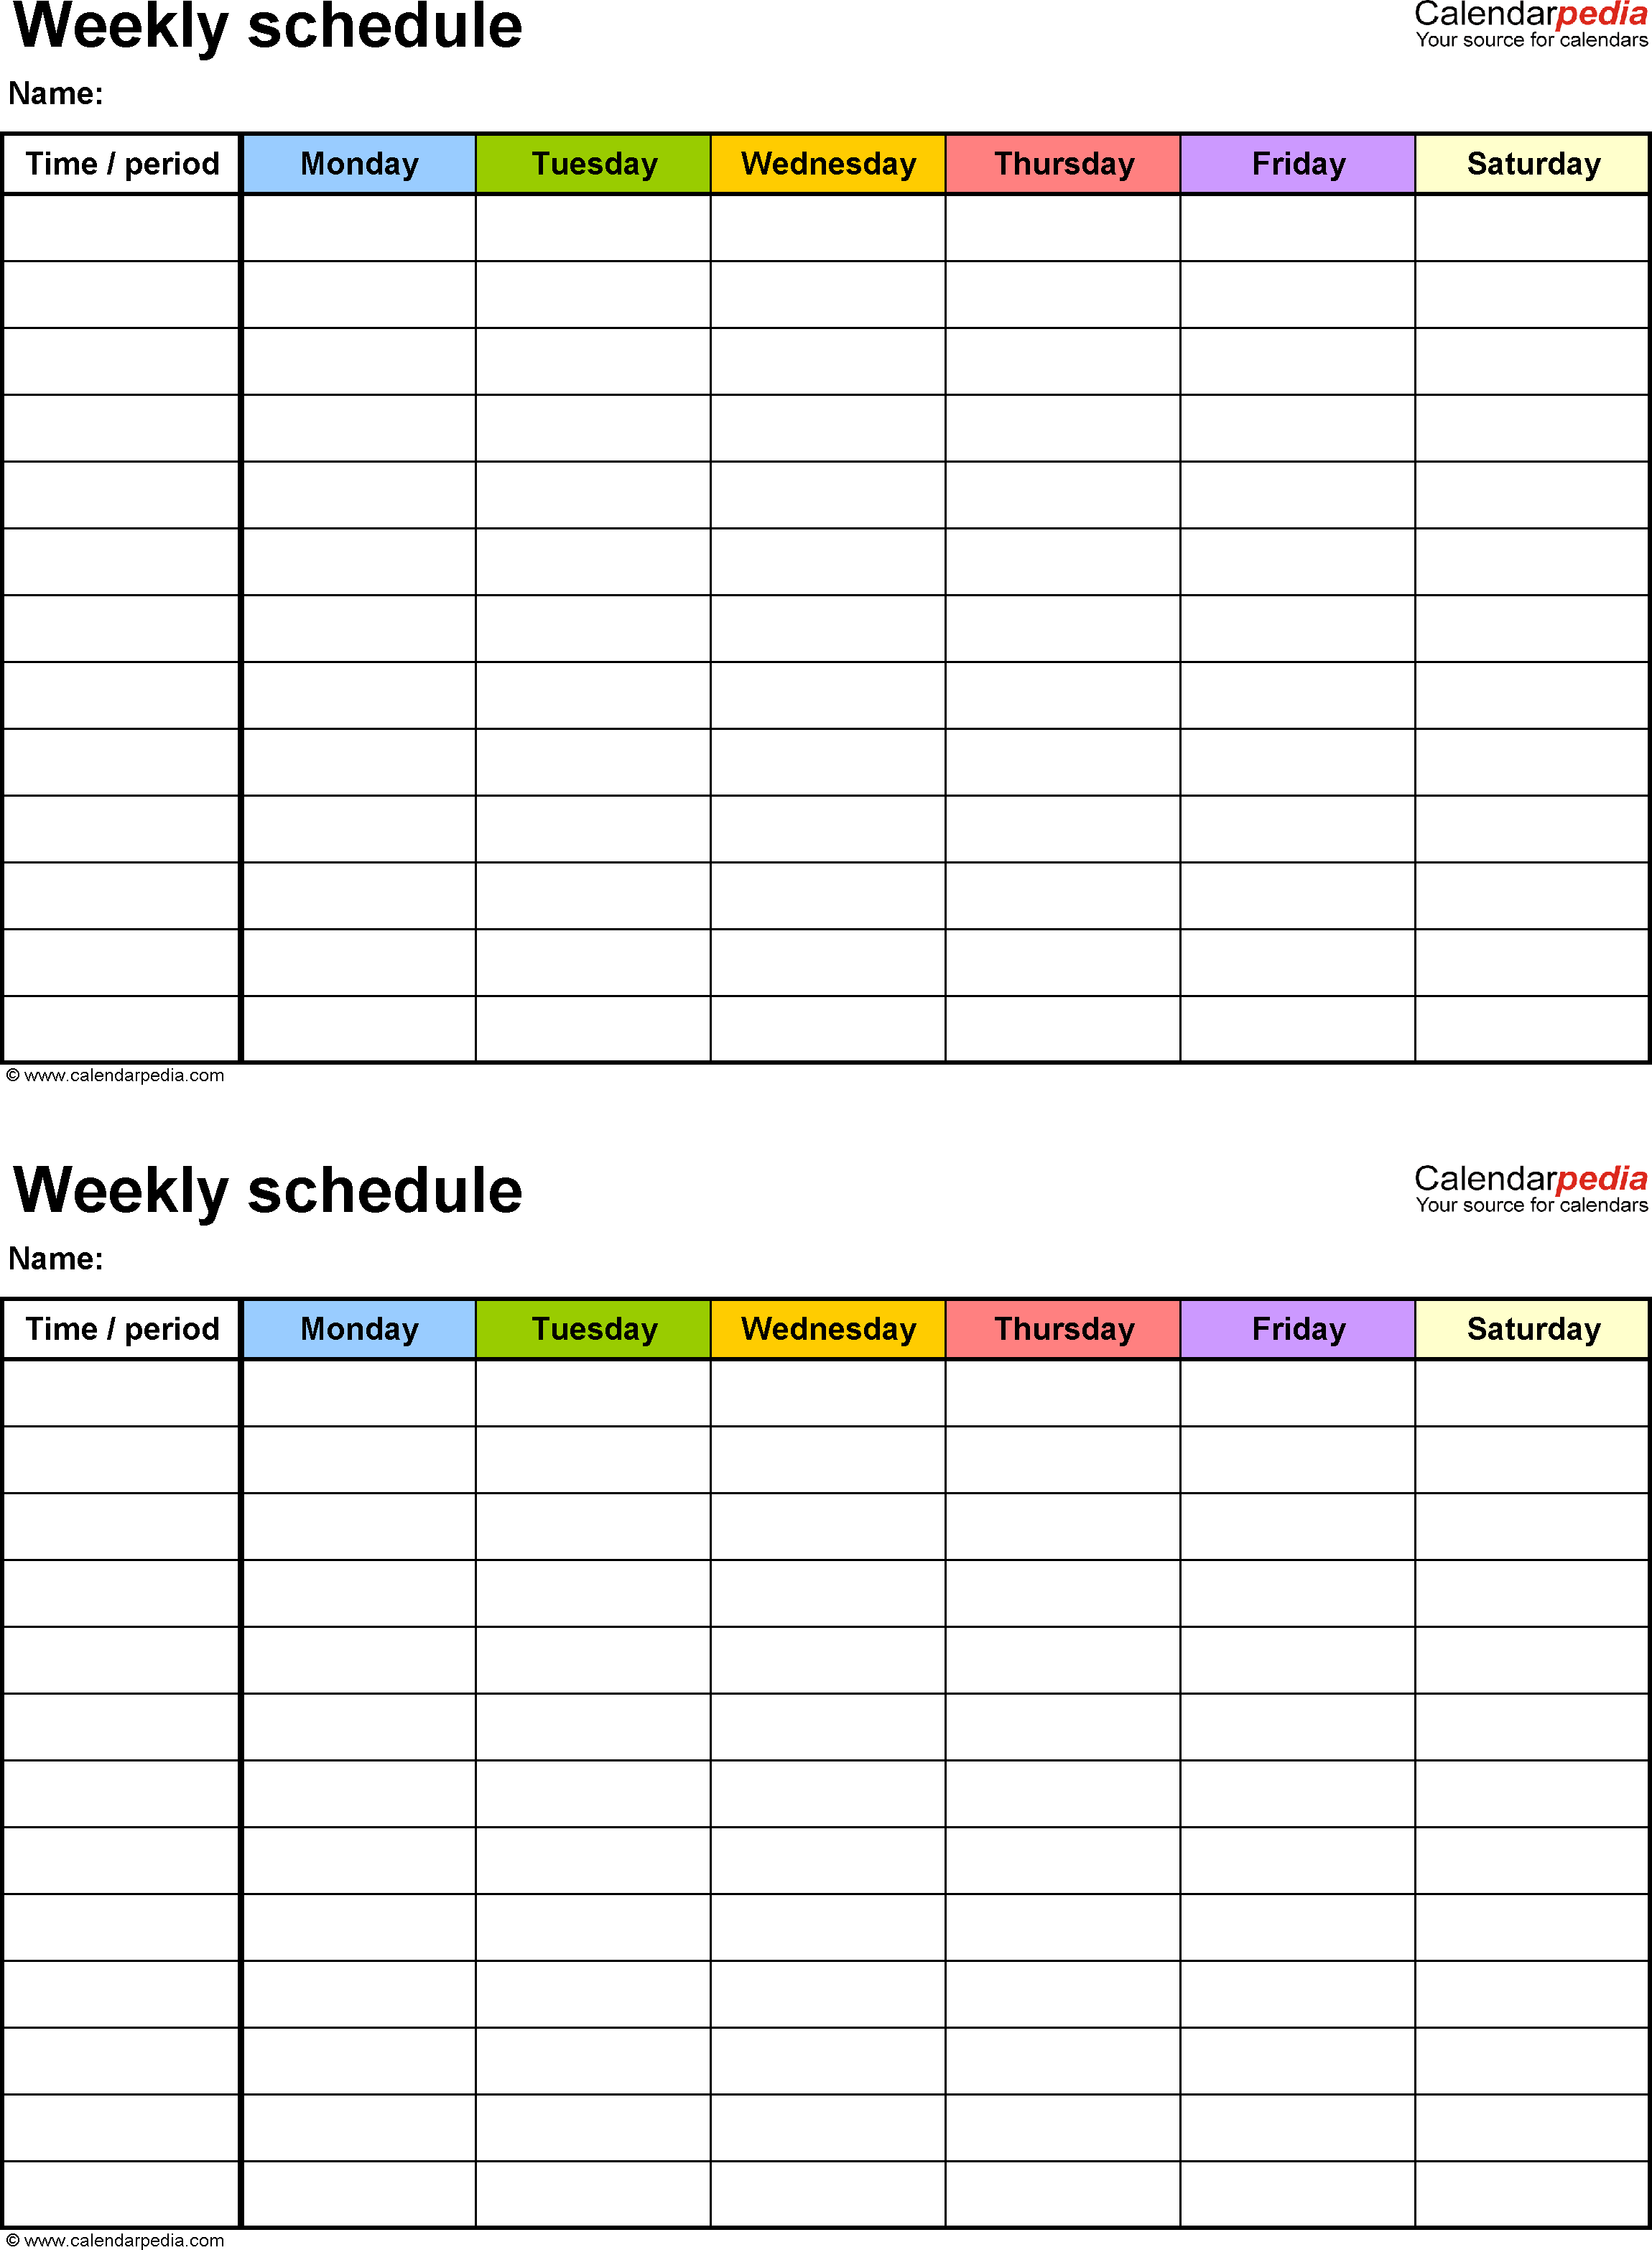 74 Free Daily Calendar Template For Excel in Word for Daily Calendar Template For Excel